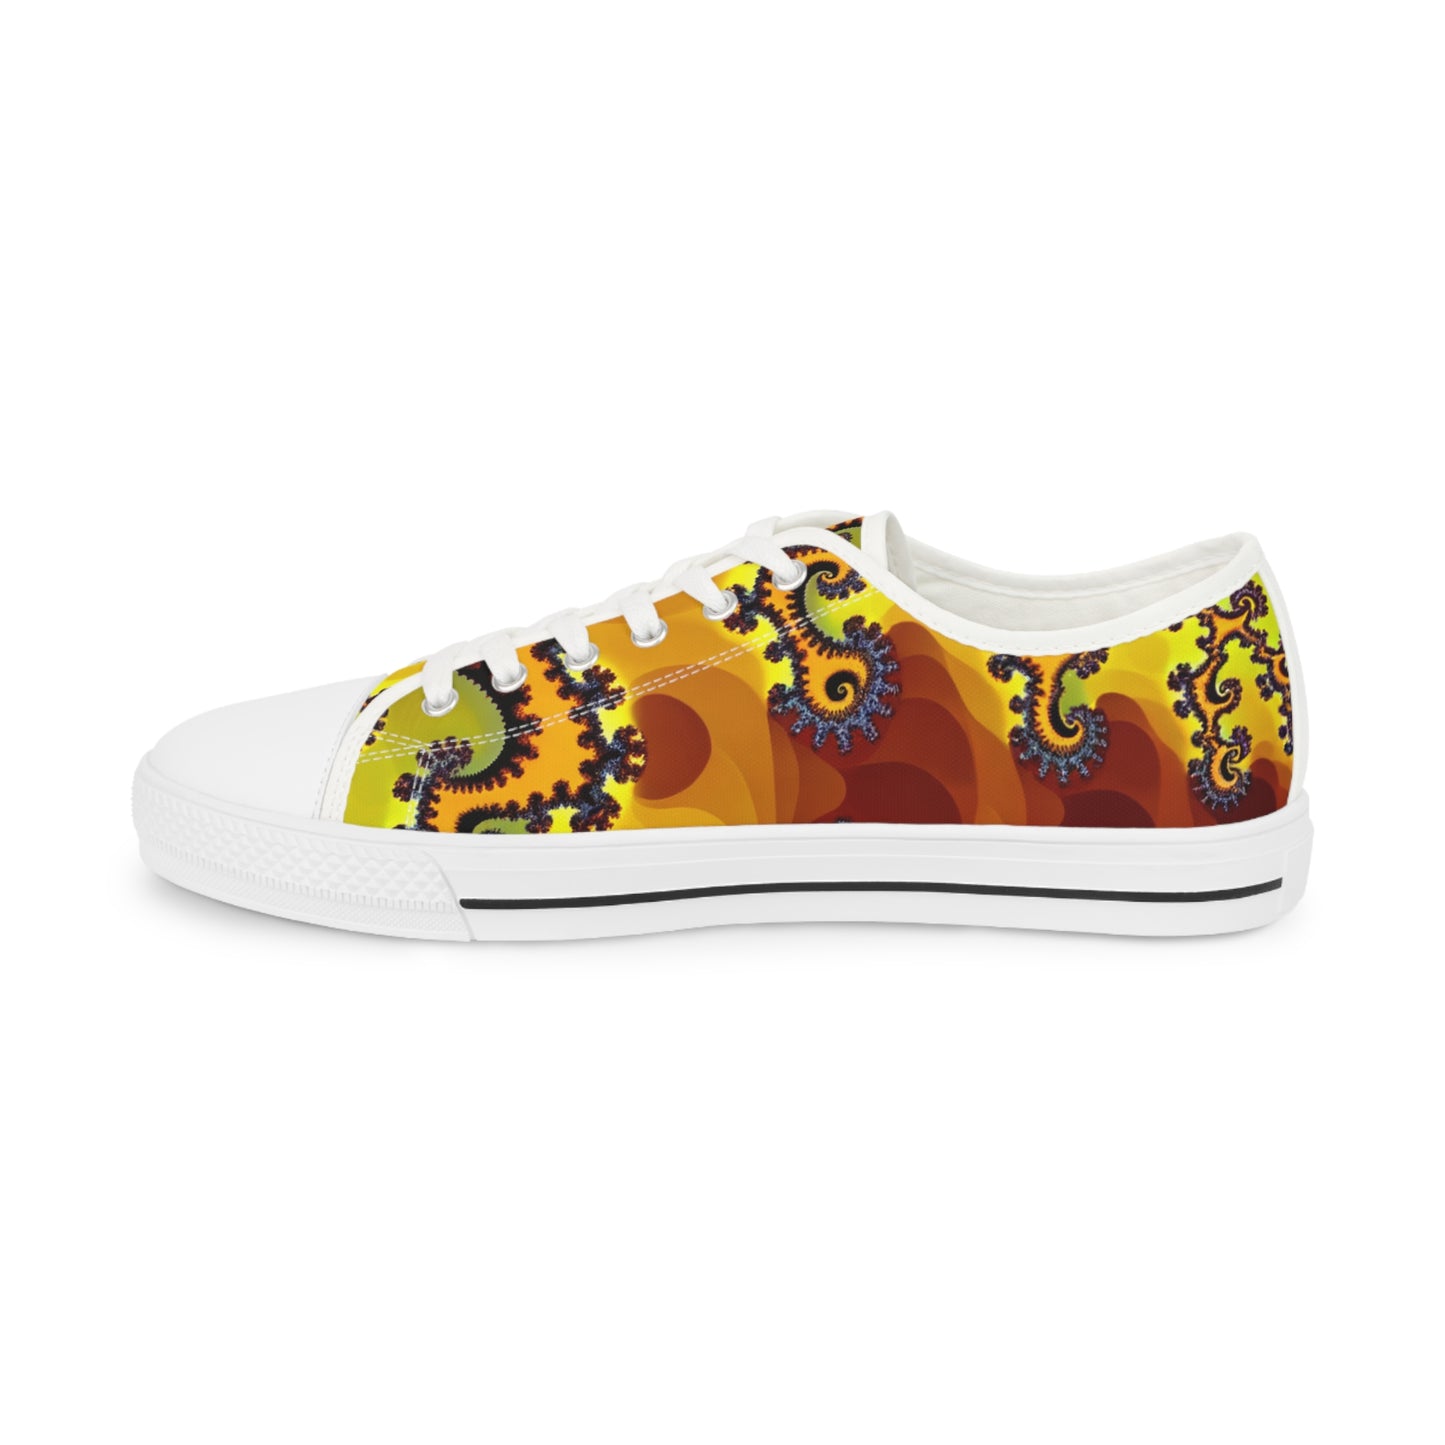 Sunny Spiral Fractal Fusion Low Top Sneakers - Men's